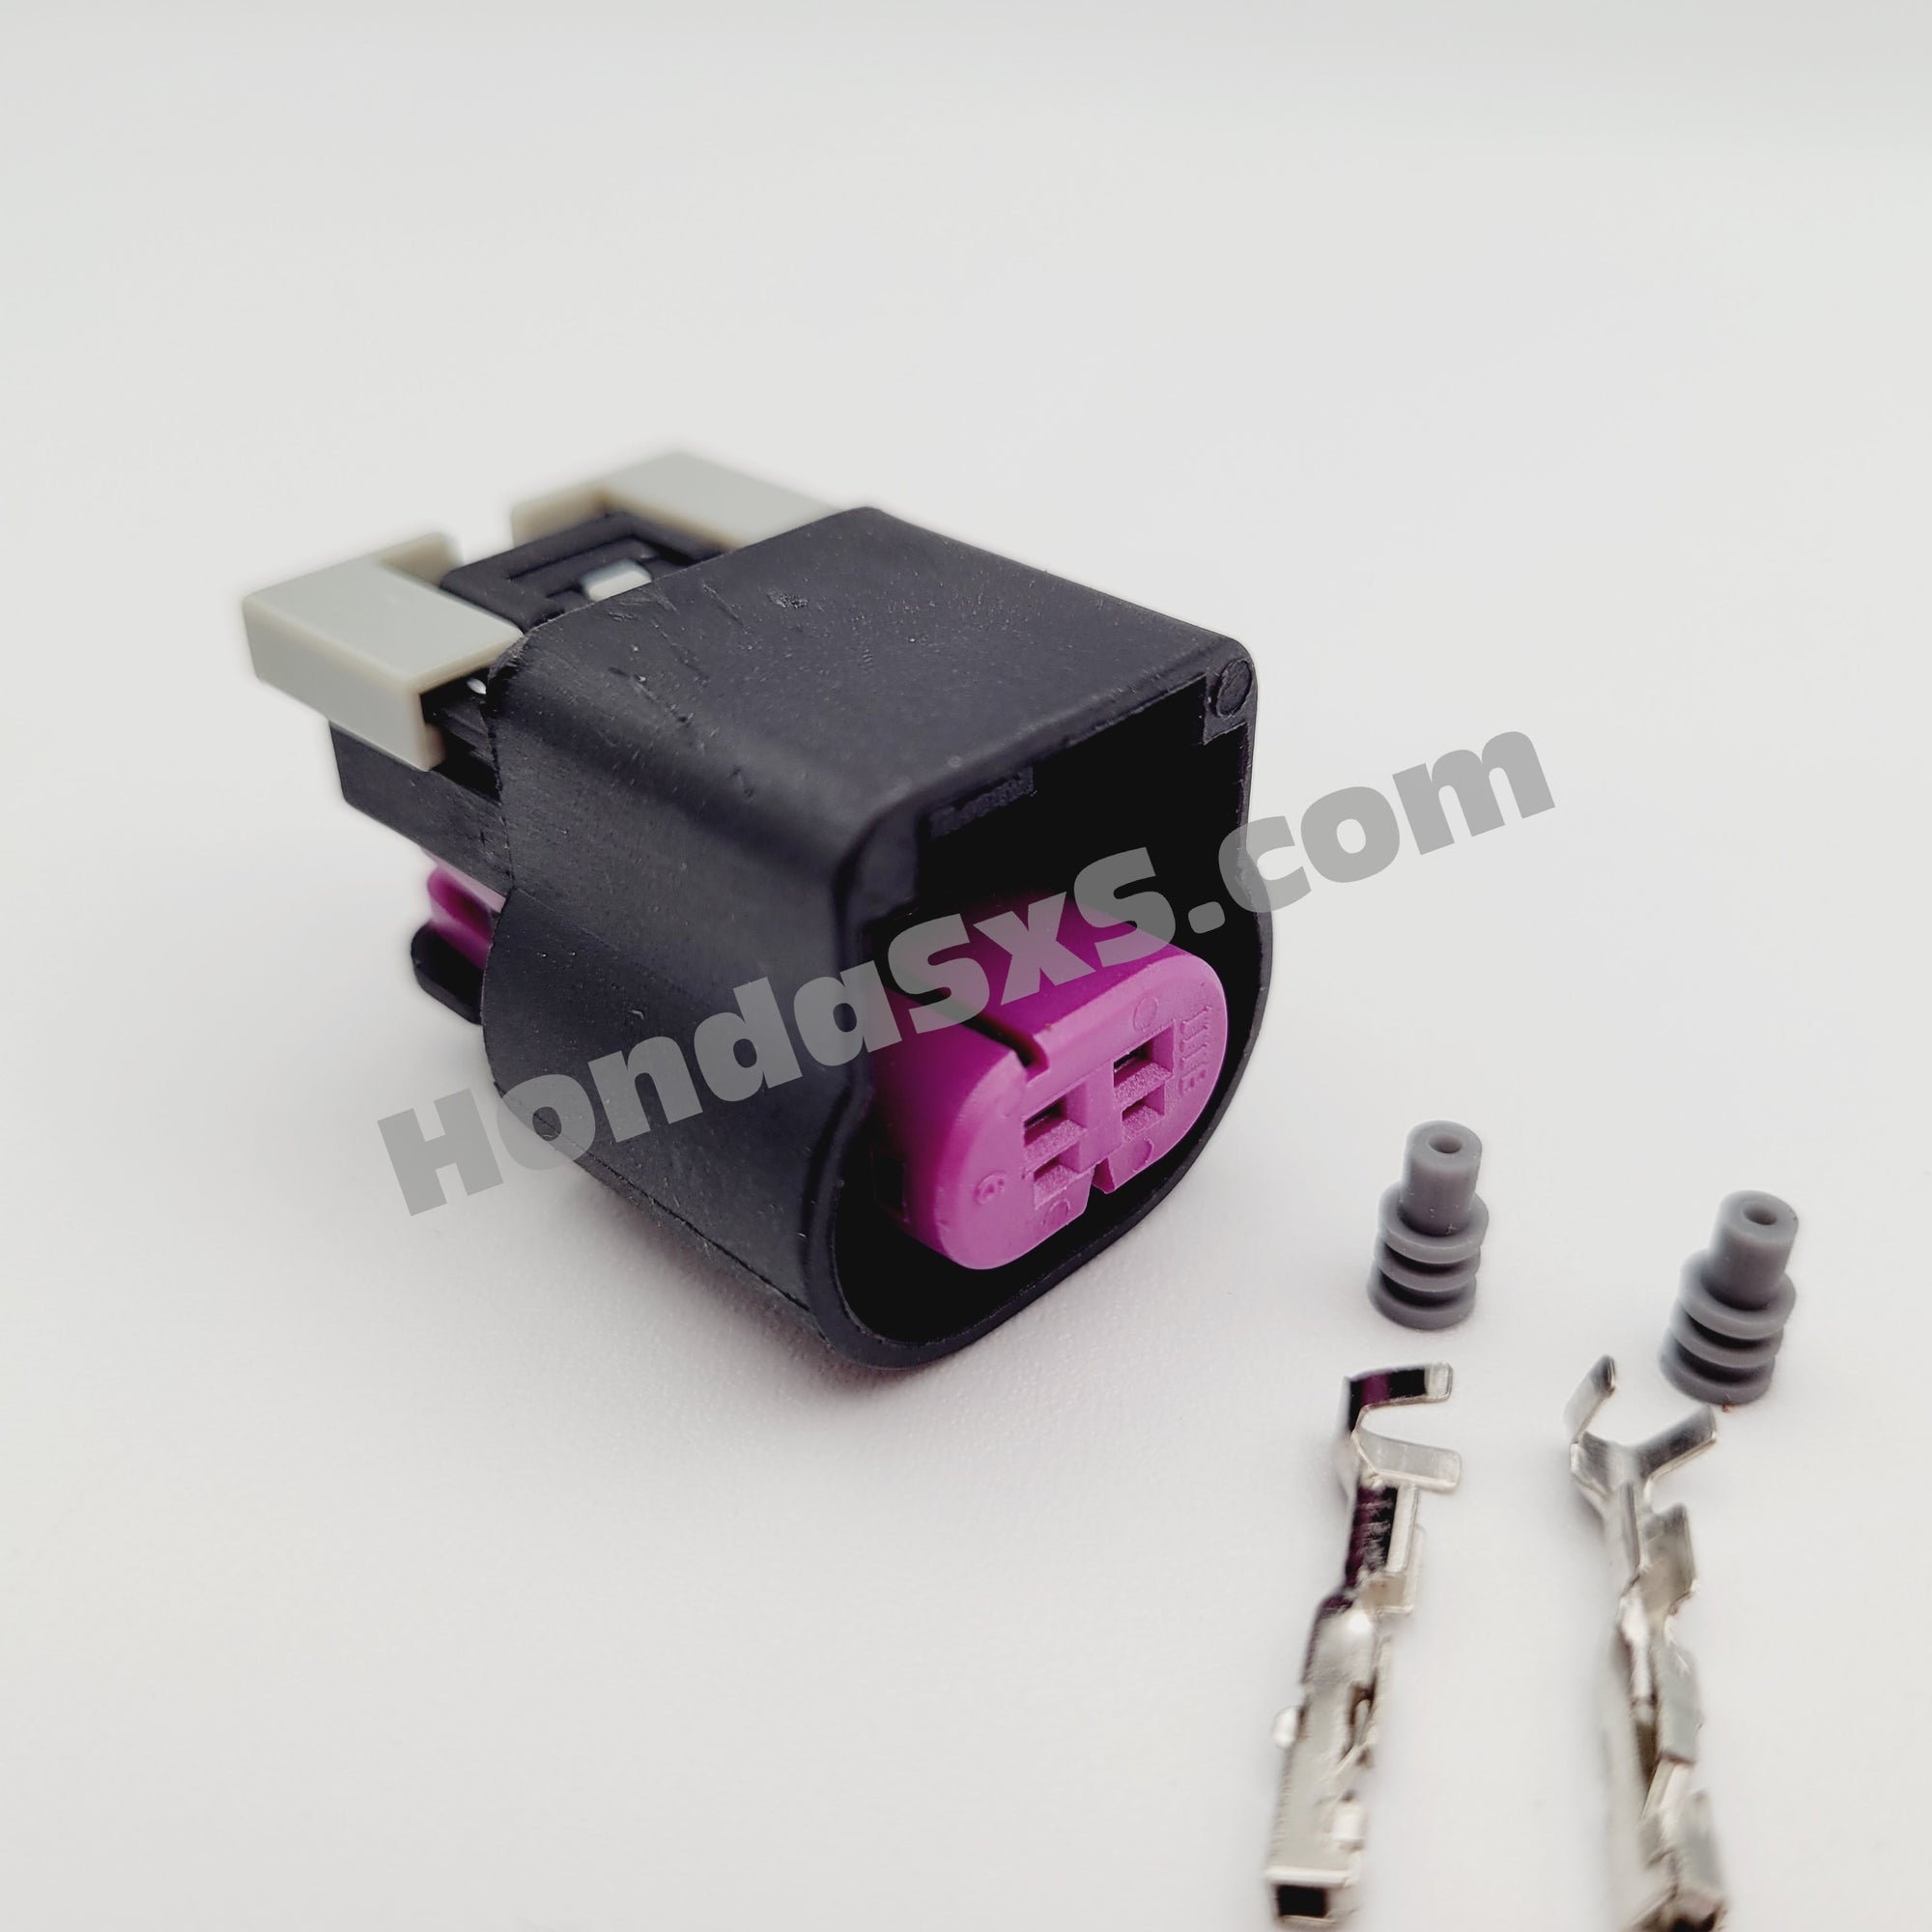 GT- 2 Pin connector. Male, Female, or set.